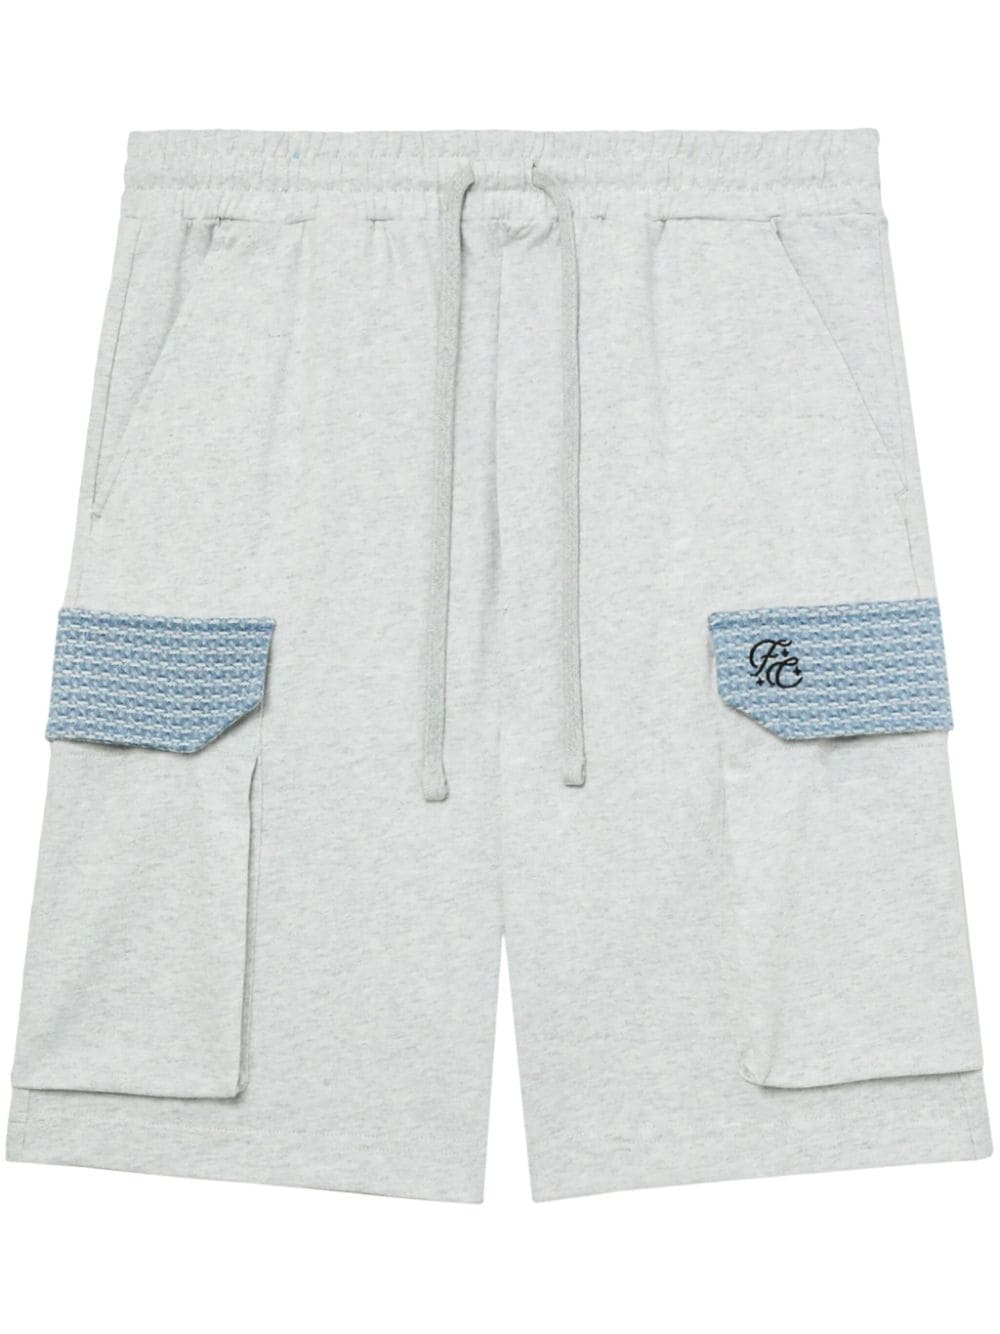 Five Cm Tweed-detailing Cotton Shorts In Blue